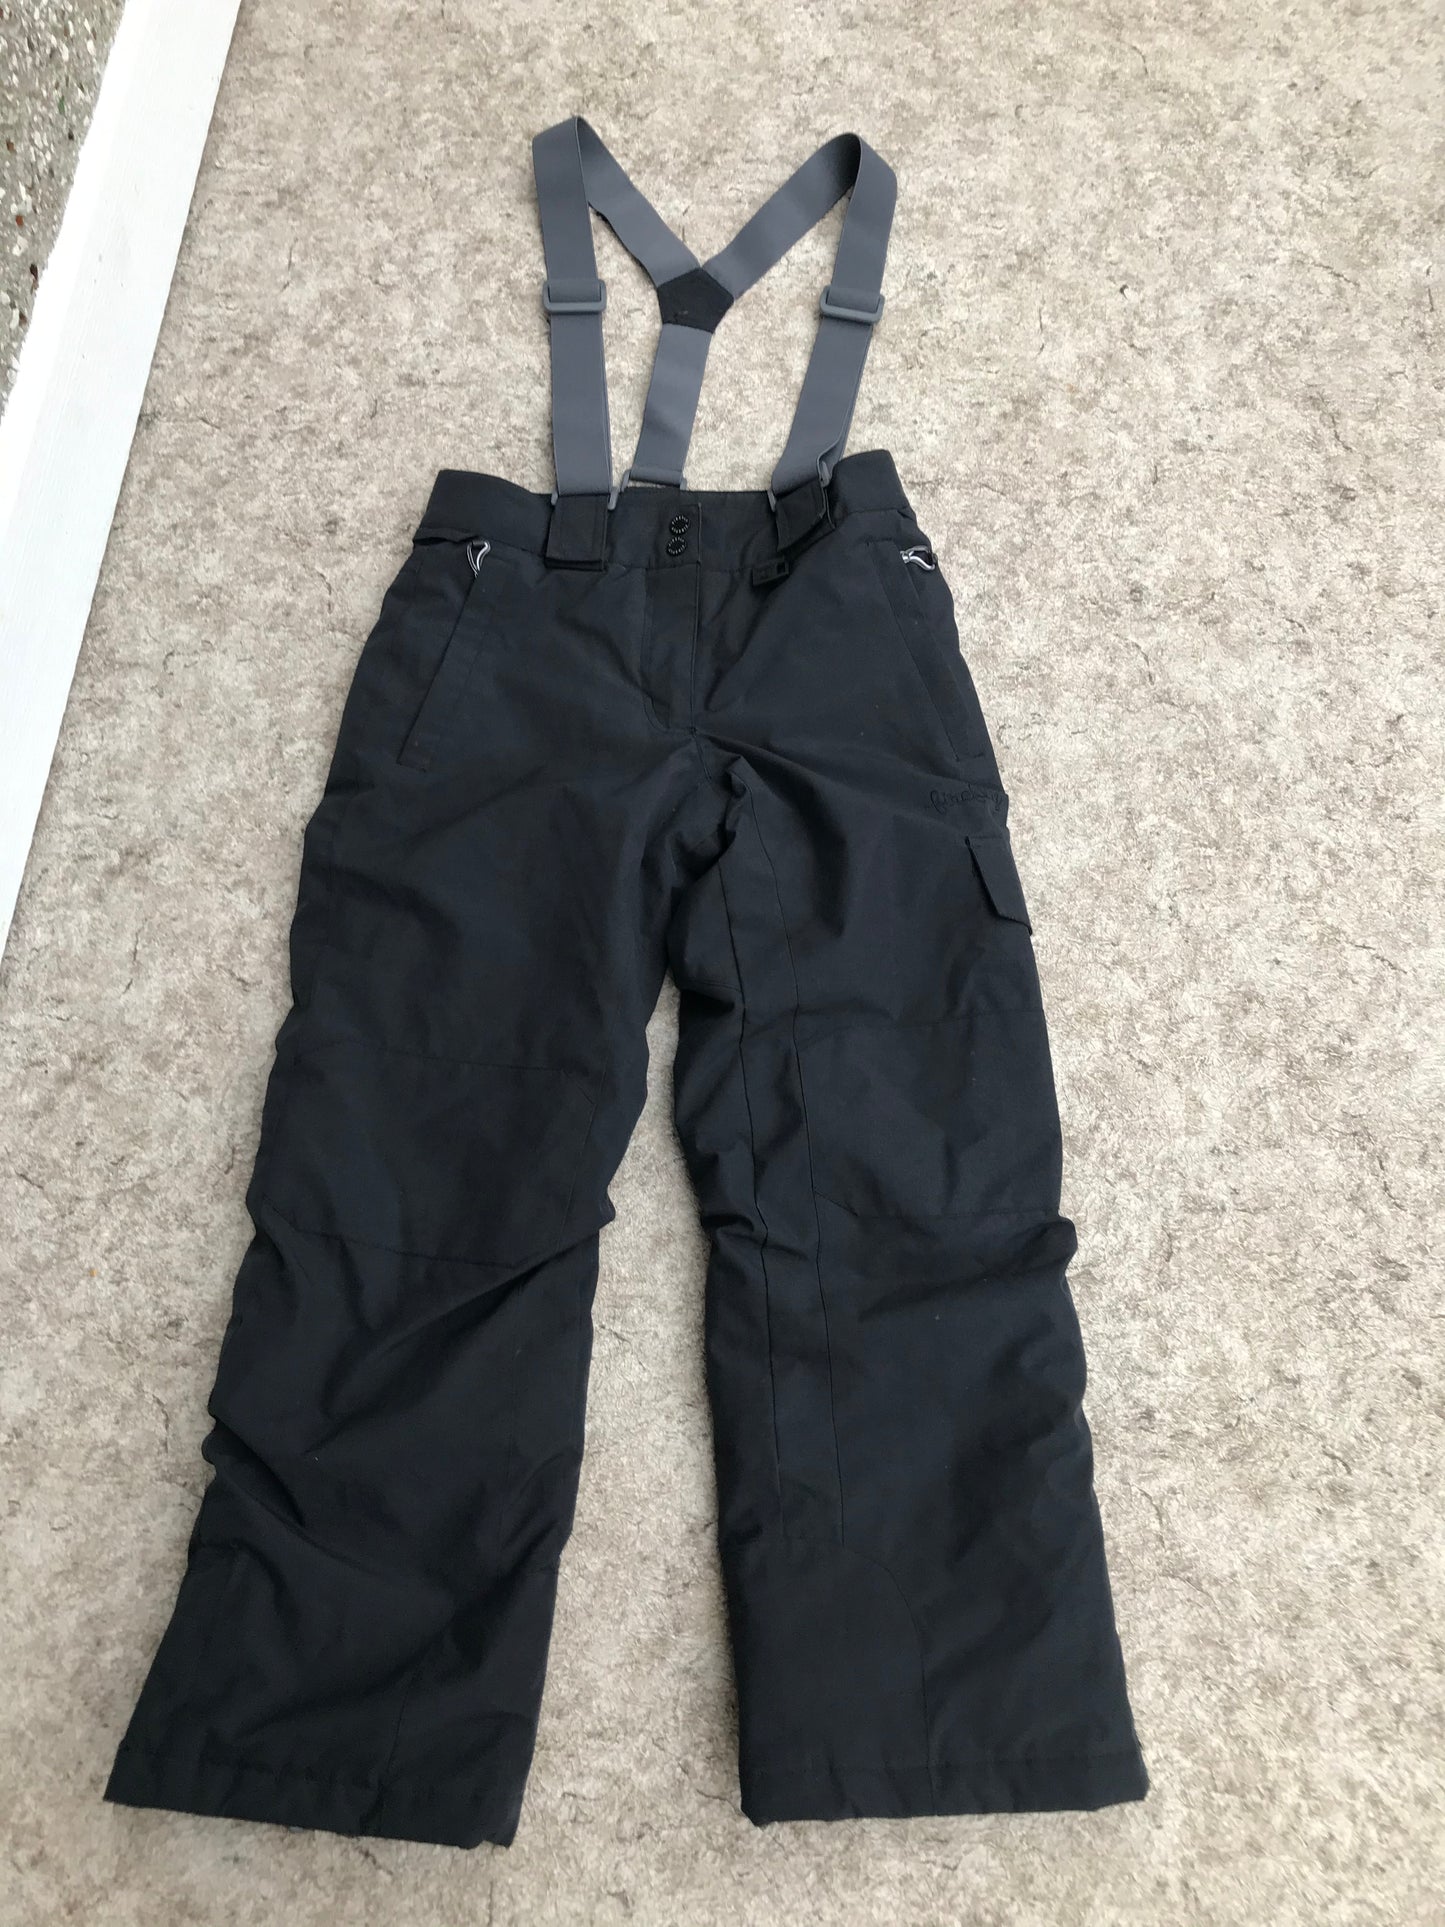 Snow Pants Child Size 10-12 Firefly Black with Adjustable Straps New Demo Model